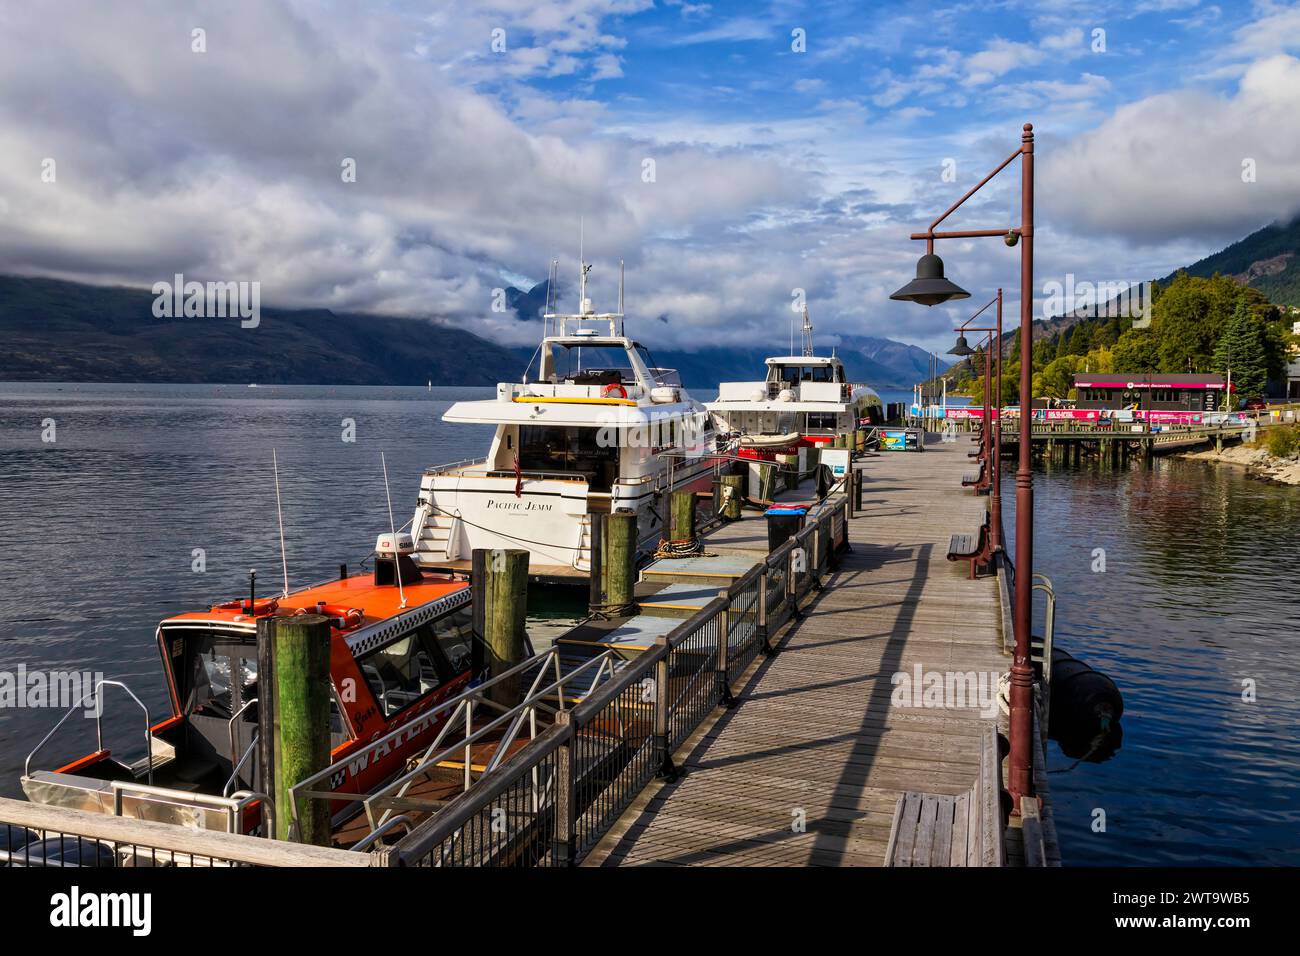 Queenstown, New Zealand - 24 Dec 2022: Main Queenstown city whaft with docked ships of adventure and experience services on Lake Wakatipu. Stock Photo